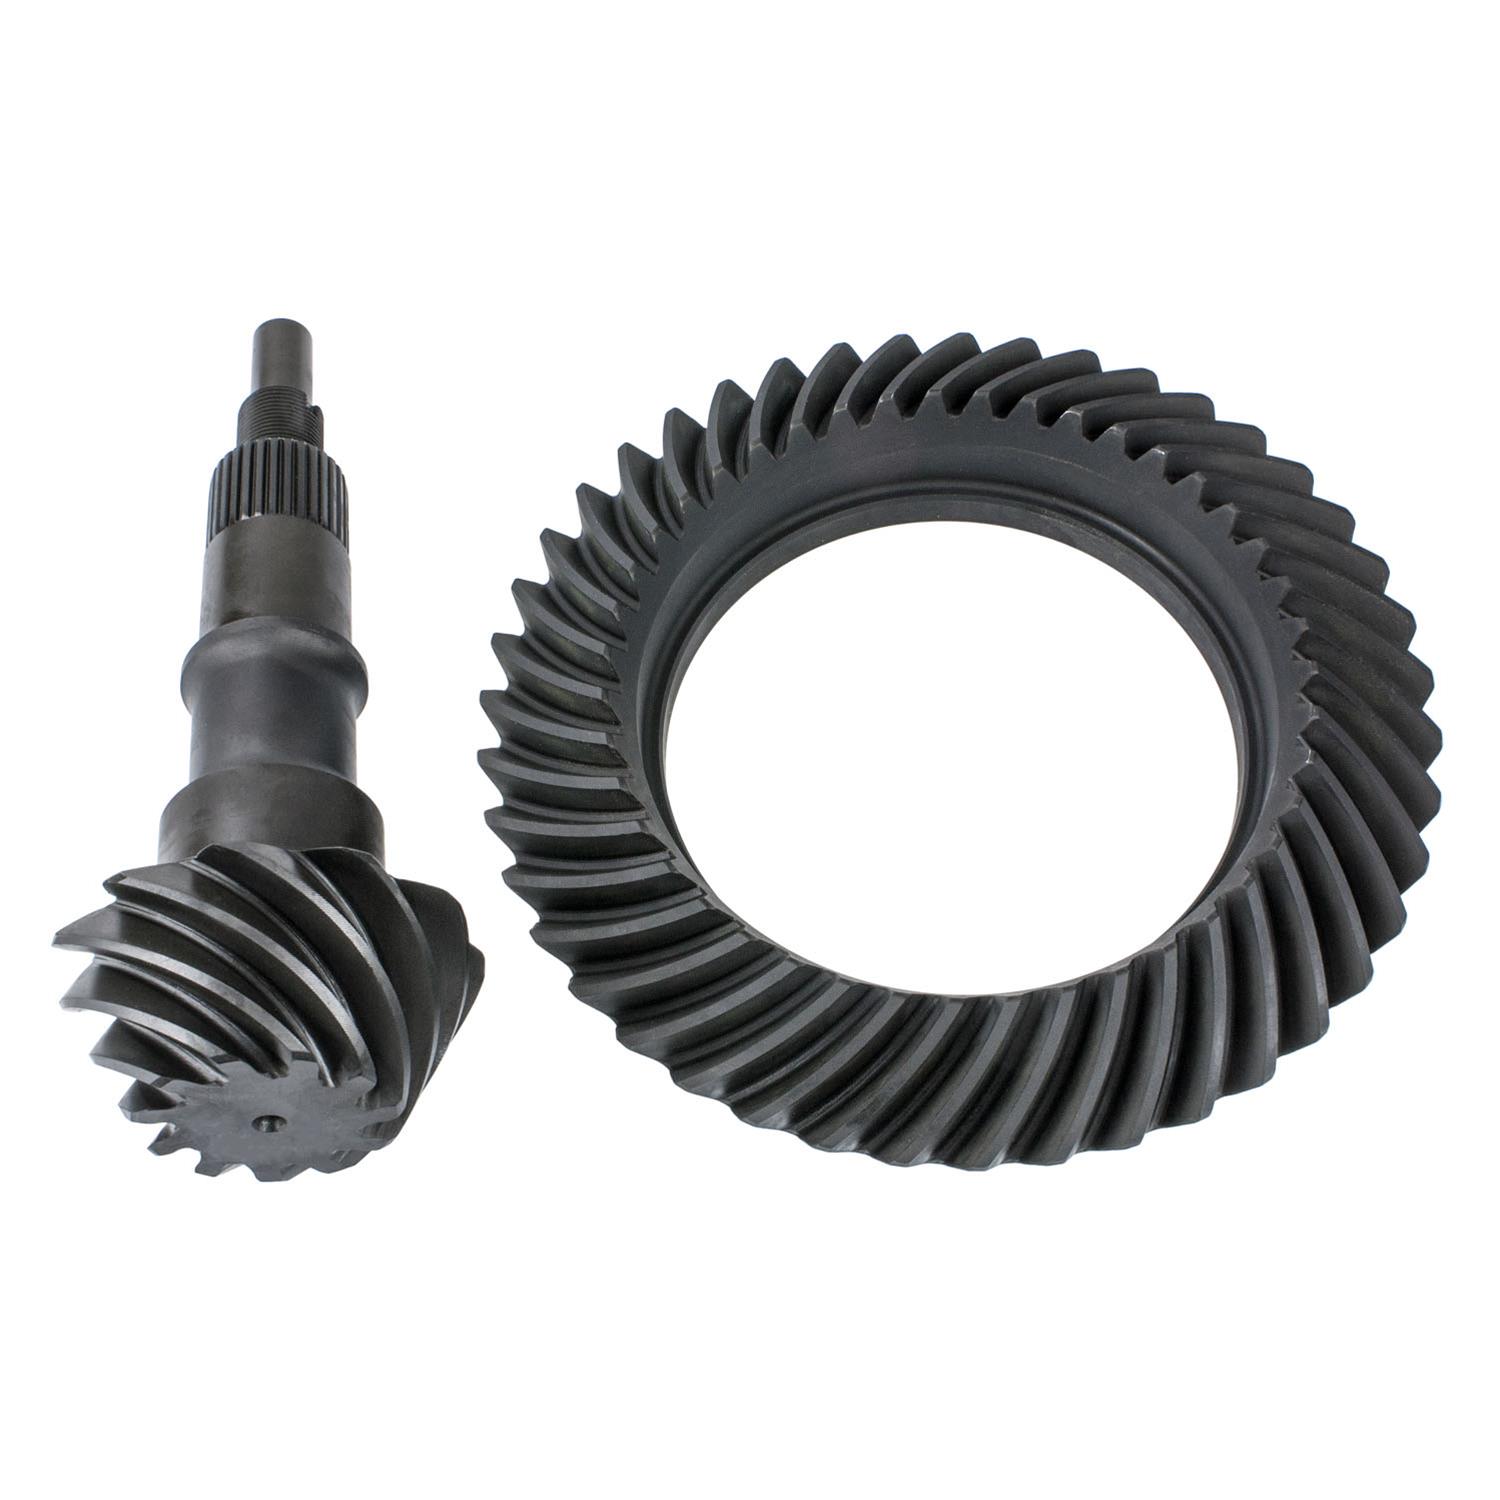 2010-2015 Camaro Motive Gear 3.91 Ring and Pinion Set - For 8.6"